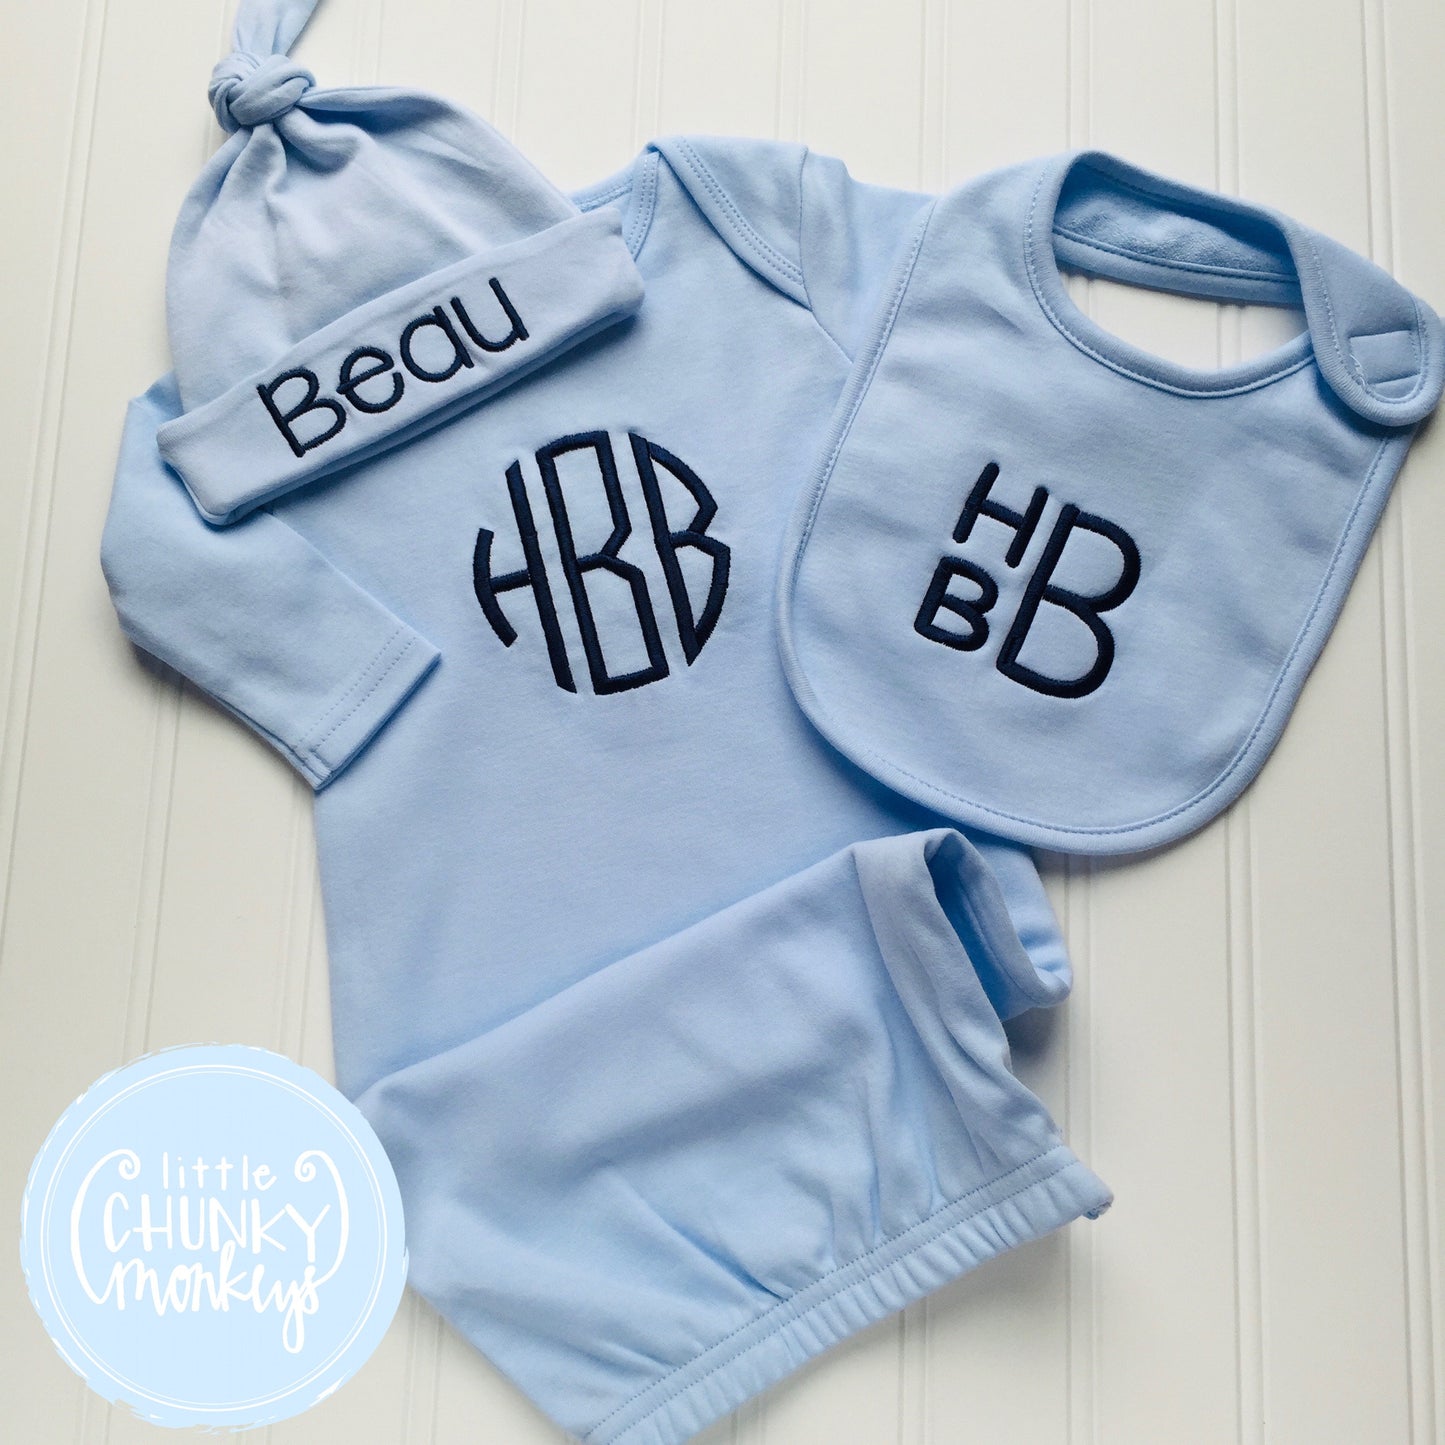 Baby Boy Gown - Bring Home Outfit - Personalized Newborn Gown with Personalization